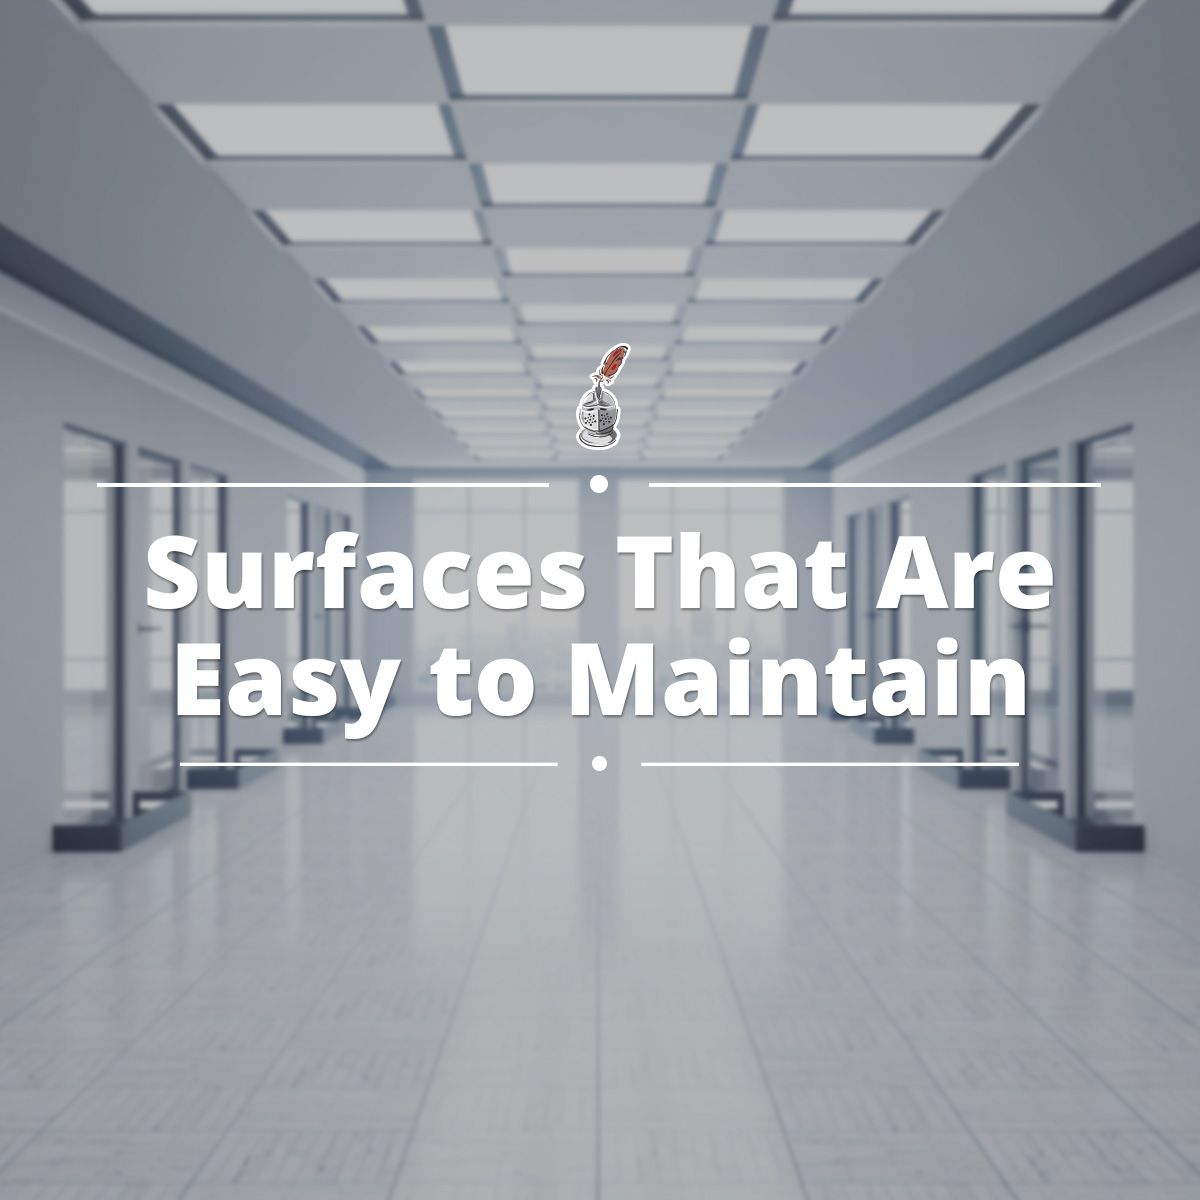 Surfaces That Are Easy to Maintain